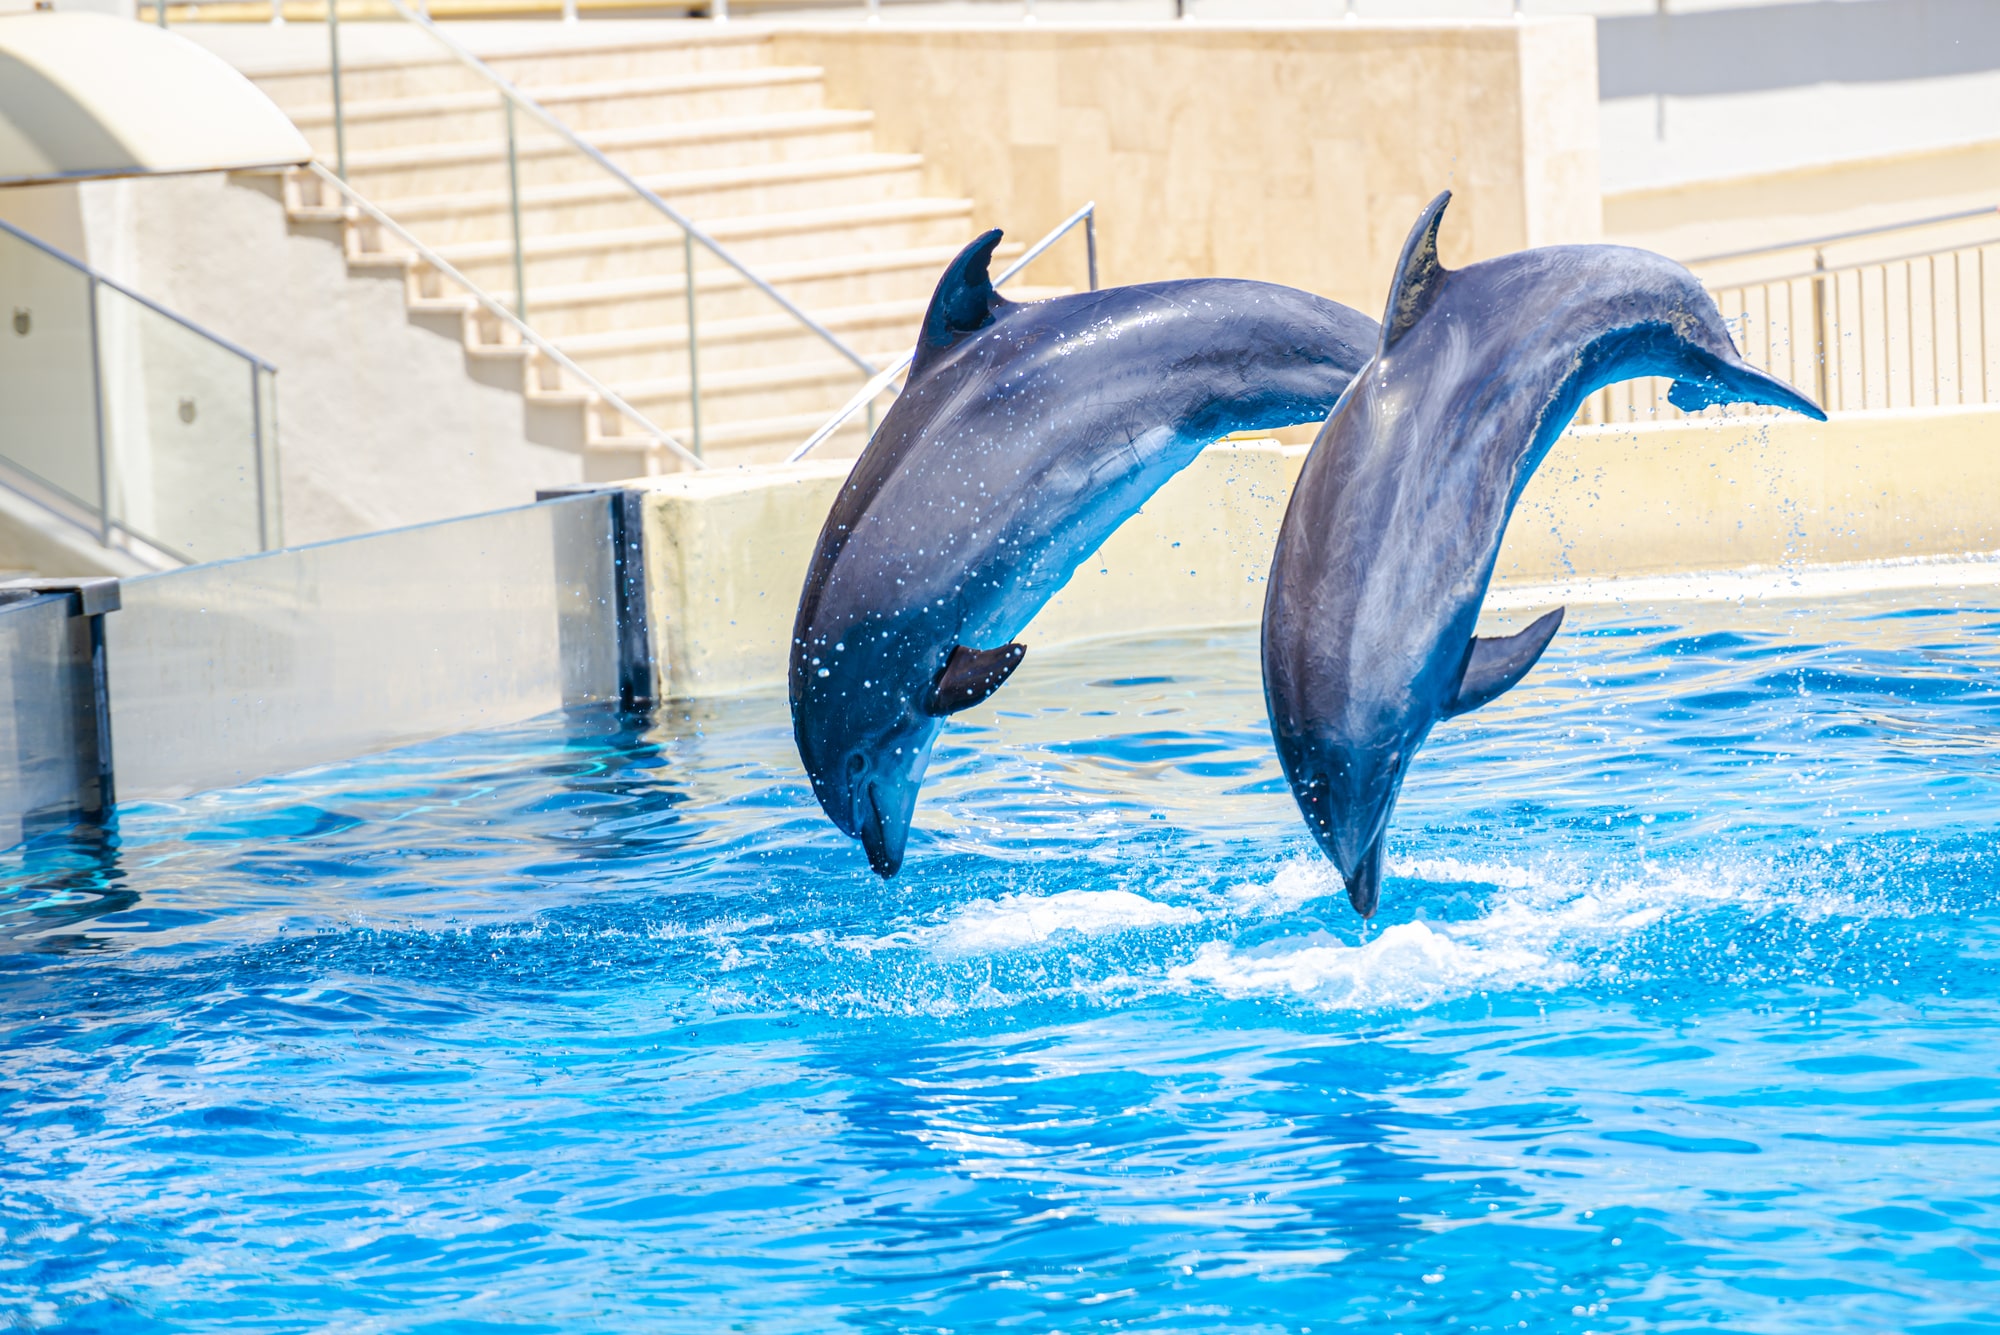 The deadly business: July 4th marks the World Day for Captive Dolphins